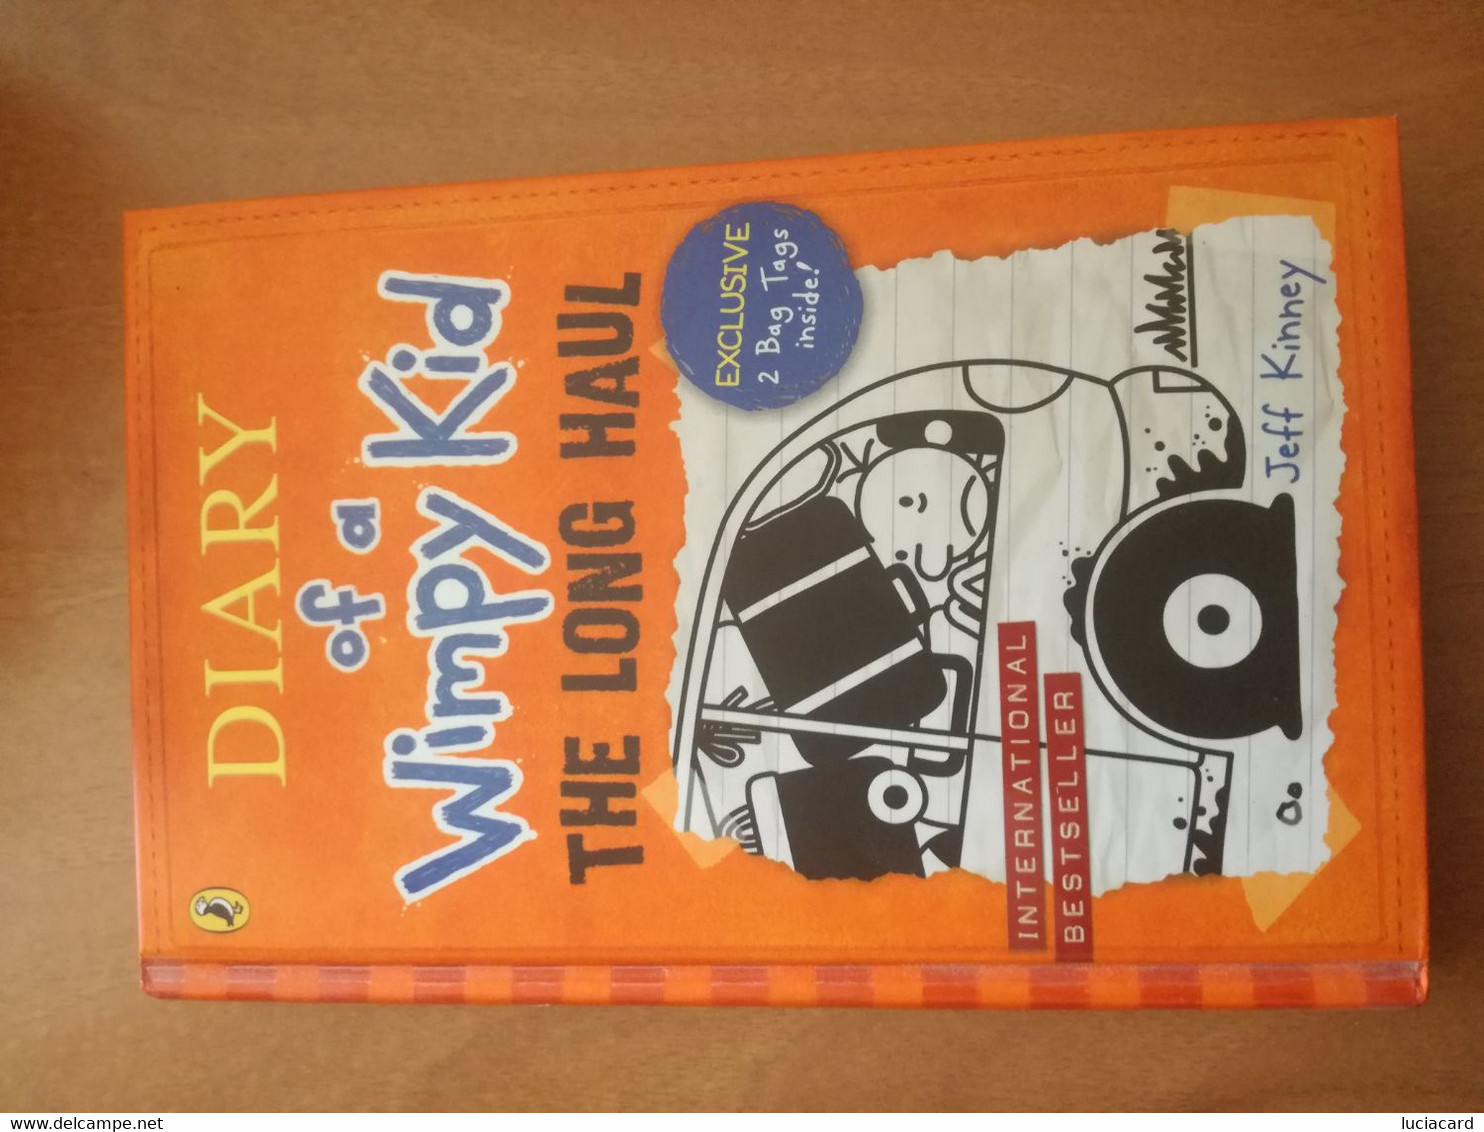 DIARY OF A WIMPY KID -THE LONG HAUL -KINNEY -PUFFIN BOOKS 2014 - Series Books